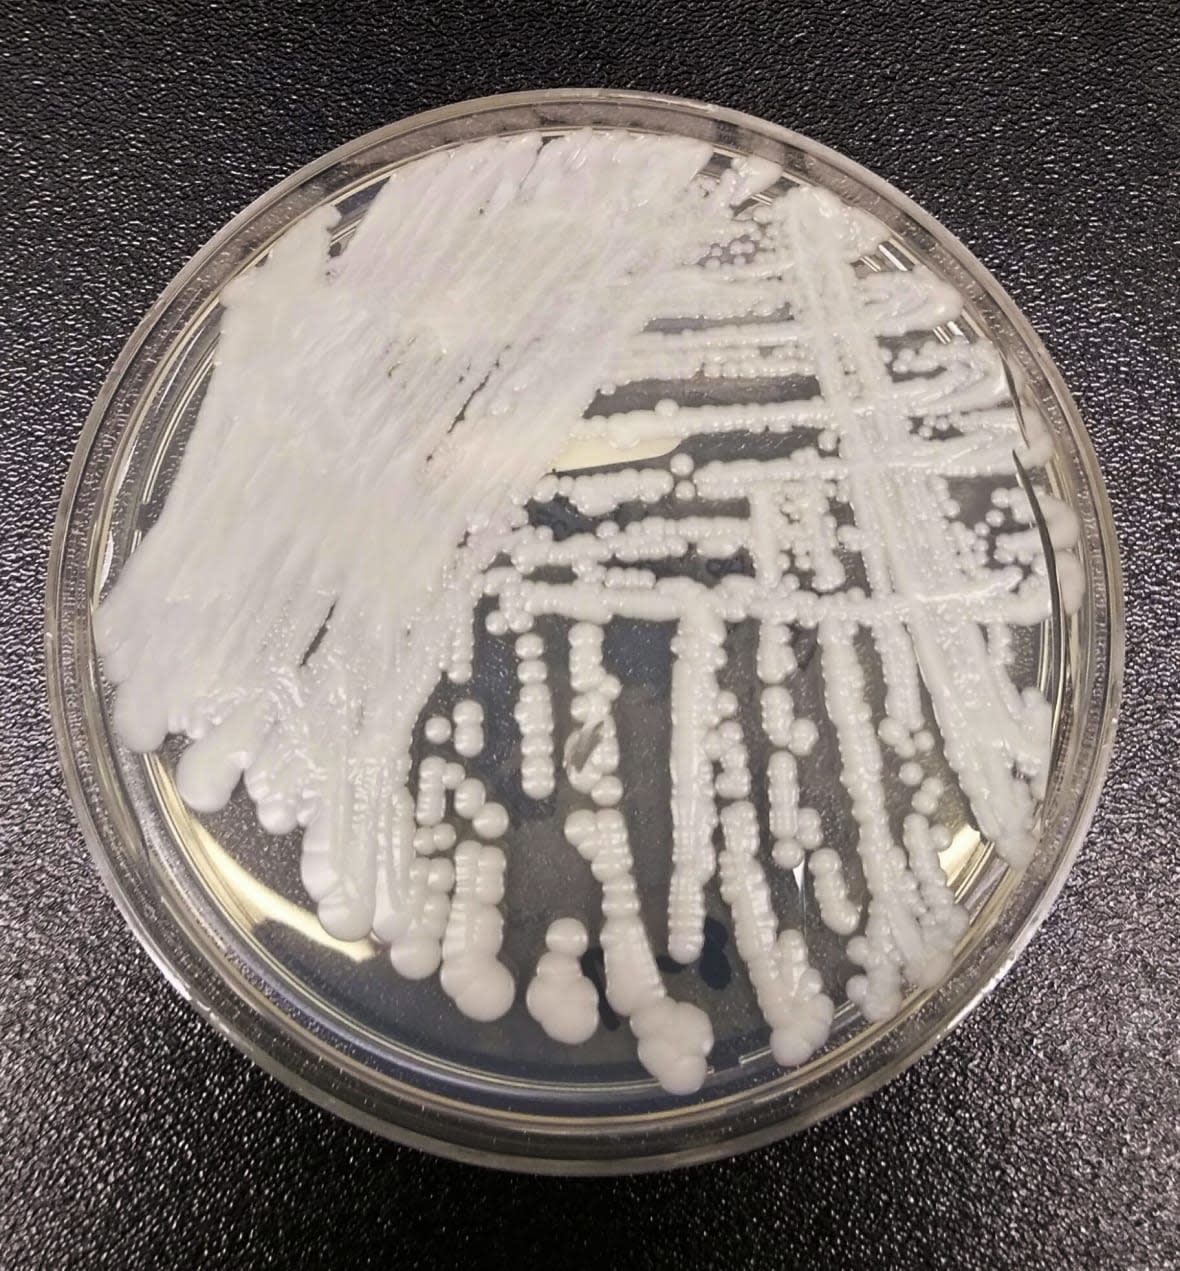 A strain of Candida auris cultured sits in a petri dish at a Centers for Disease Control and Prevention laboratory. (Shawn Lockhart/Centers for Disease Control and Prevention via AP, File)